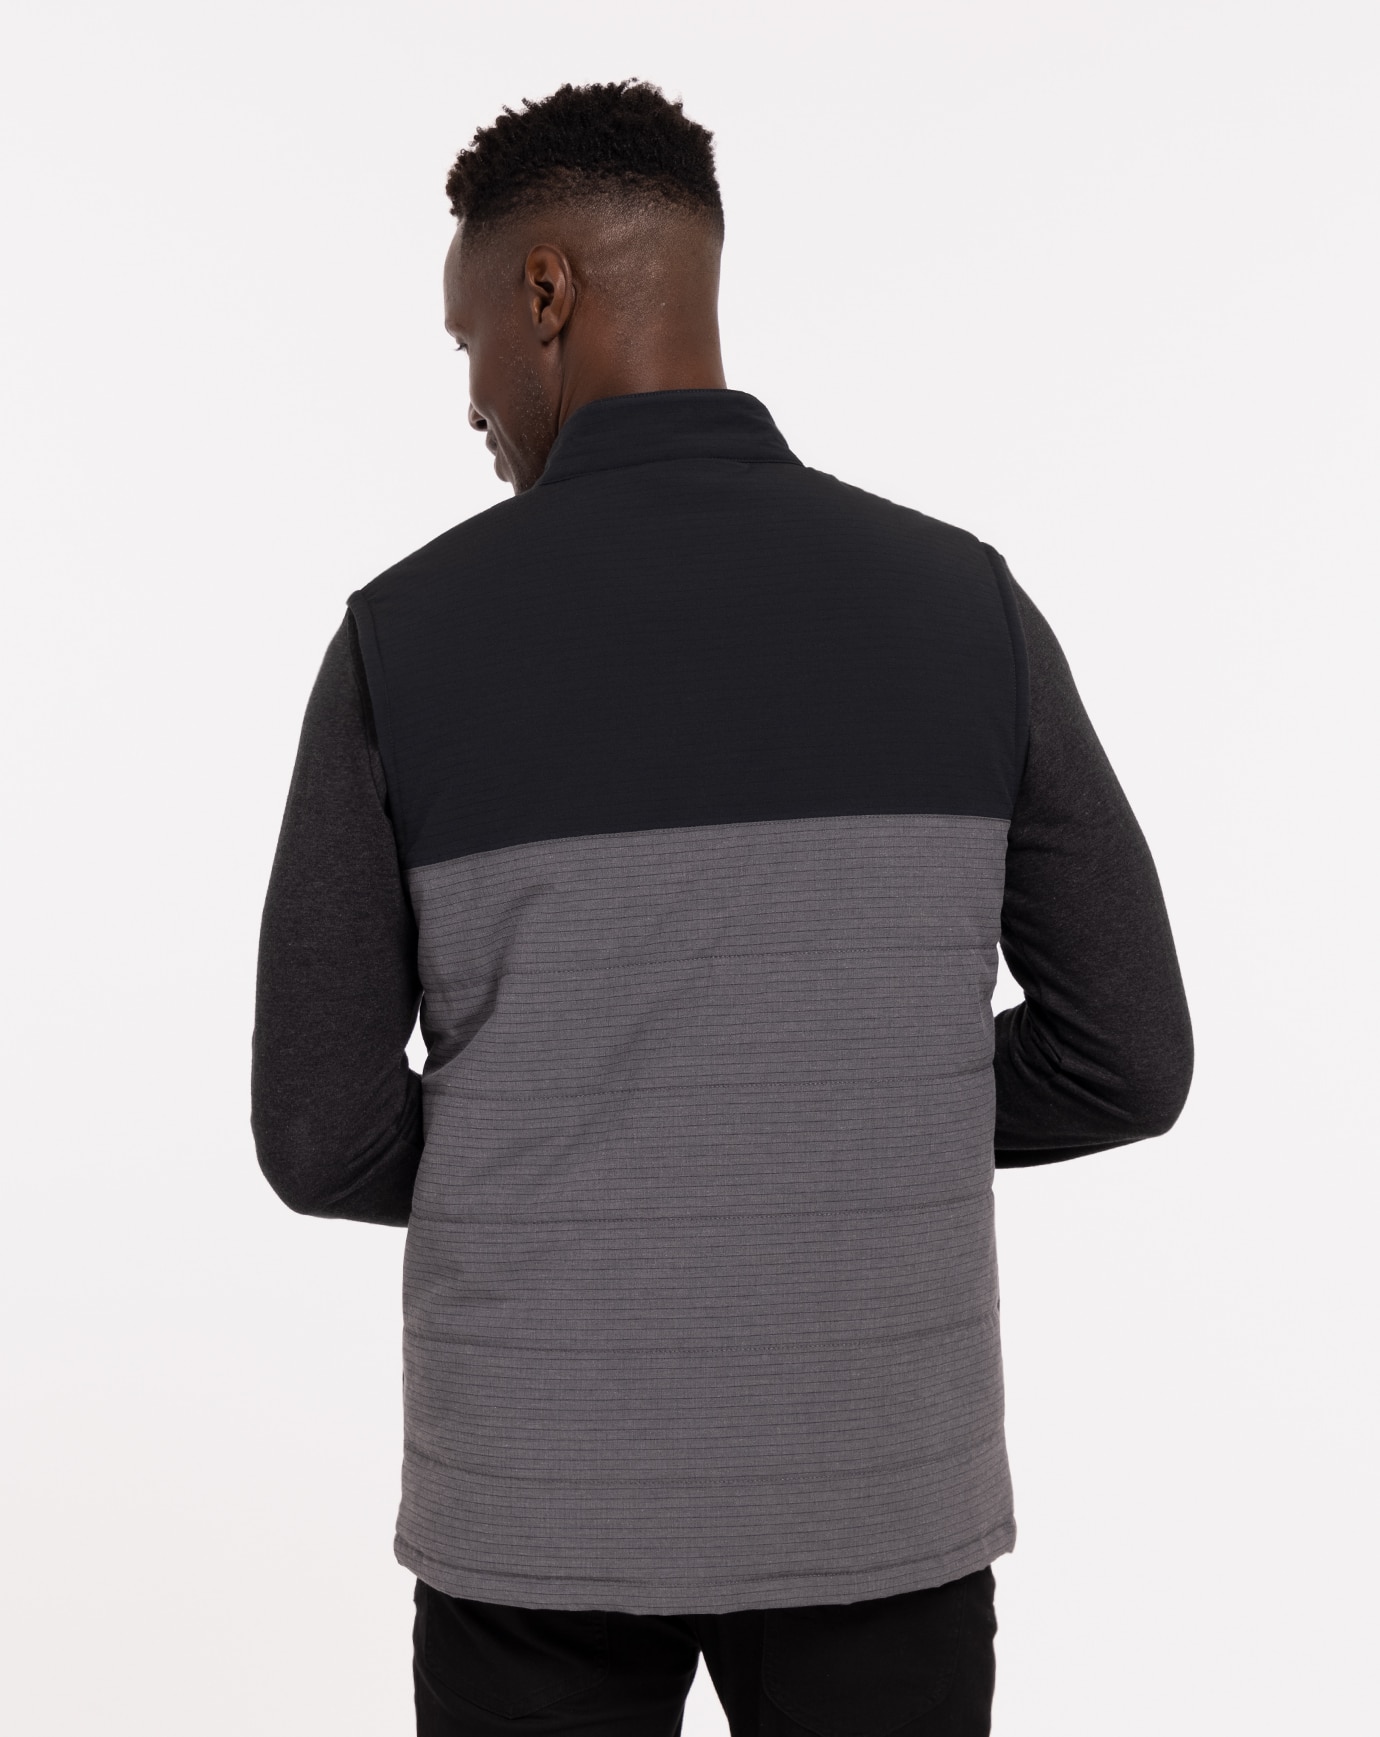 EASY OUT VEST Image Thumbnail 3